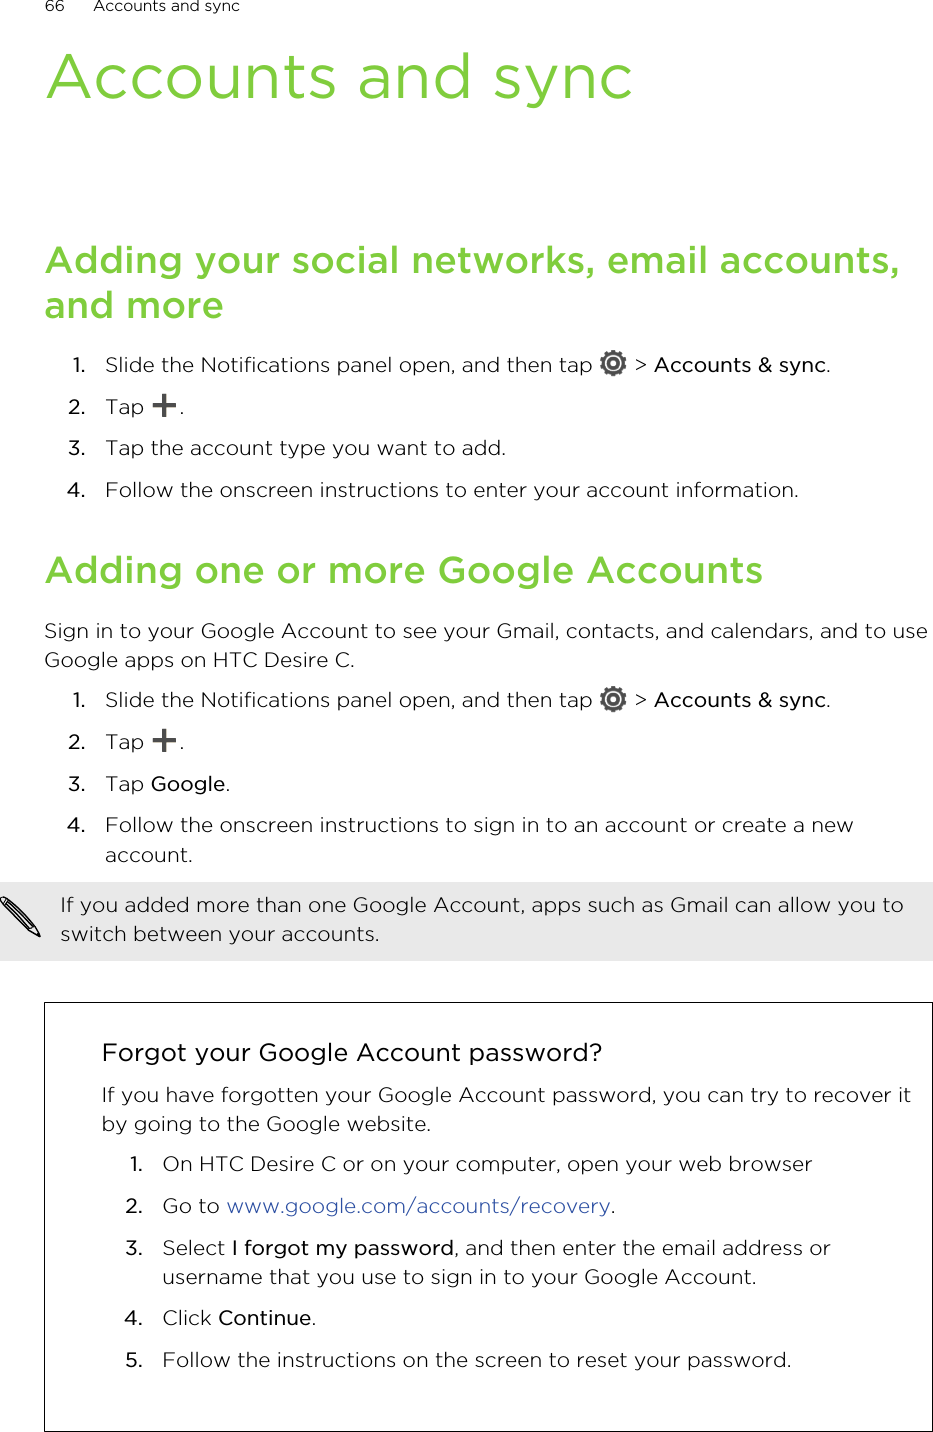 Accounts and syncAdding your social networks, email accounts,and more1. Slide the Notifications panel open, and then tap   &gt; Accounts &amp; sync.2. Tap  .3. Tap the account type you want to add.4. Follow the onscreen instructions to enter your account information.Adding one or more Google AccountsSign in to your Google Account to see your Gmail, contacts, and calendars, and to useGoogle apps on HTC Desire C.1. Slide the Notifications panel open, and then tap   &gt; Accounts &amp; sync.2. Tap  .3. Tap Google.4. Follow the onscreen instructions to sign in to an account or create a newaccount.If you added more than one Google Account, apps such as Gmail can allow you toswitch between your accounts.Forgot your Google Account password?If you have forgotten your Google Account password, you can try to recover itby going to the Google website.1. On HTC Desire C or on your computer, open your web browser2. Go to www.google.com/accounts/recovery.3. Select I forgot my password, and then enter the email address orusername that you use to sign in to your Google Account.4. Click Continue.5. Follow the instructions on the screen to reset your password.66 Accounts and sync